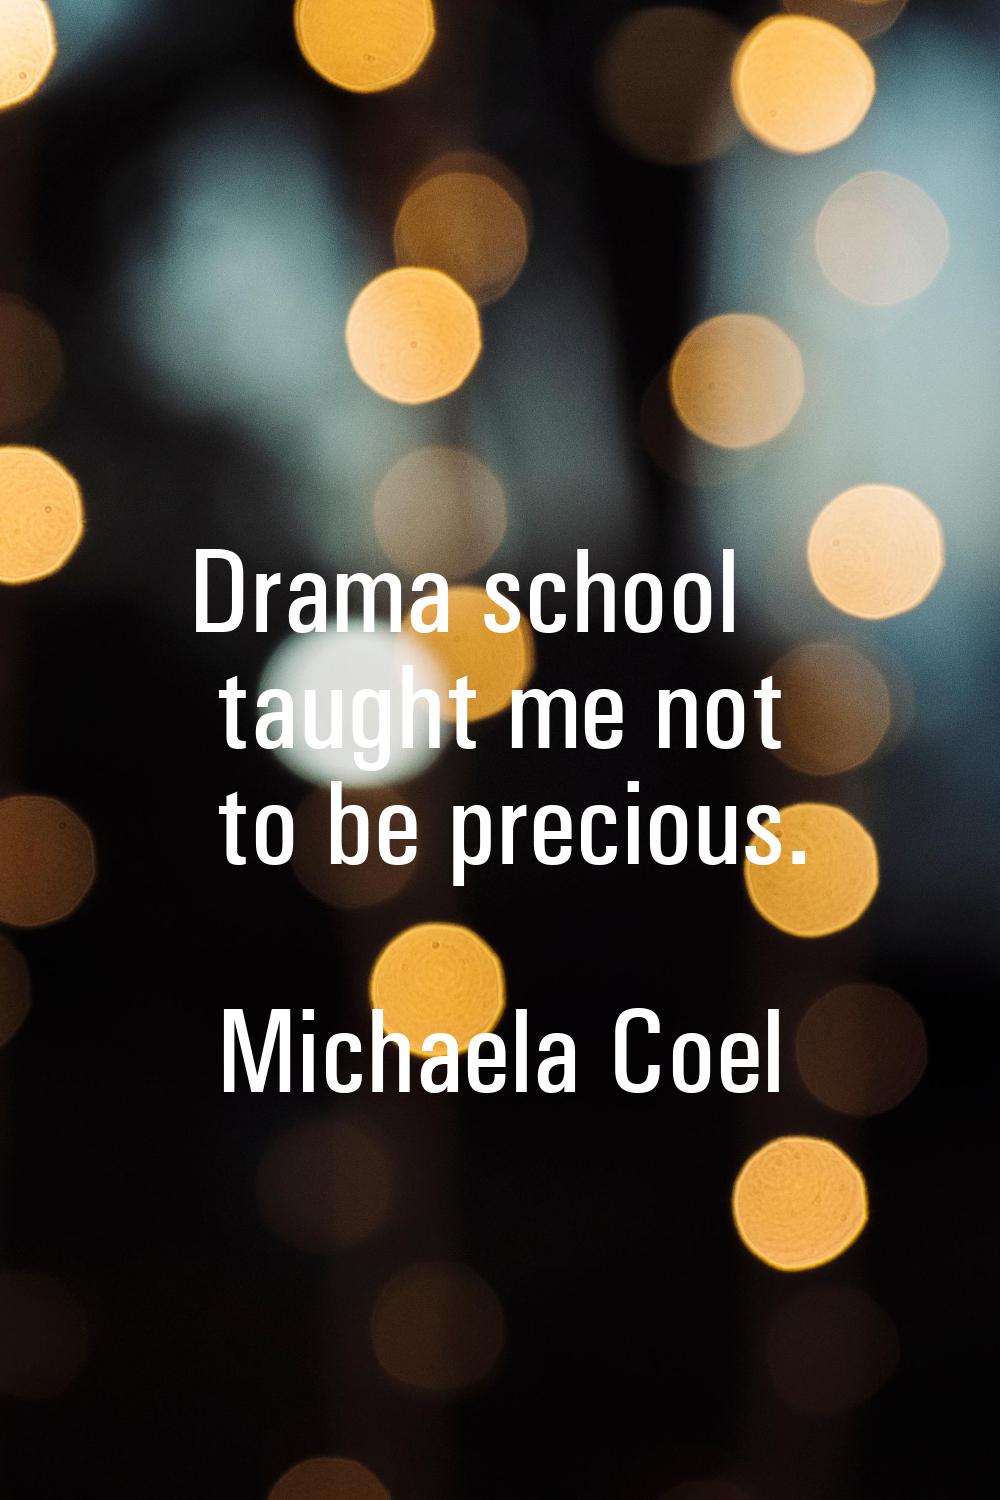 Drama school taught me not to be precious.